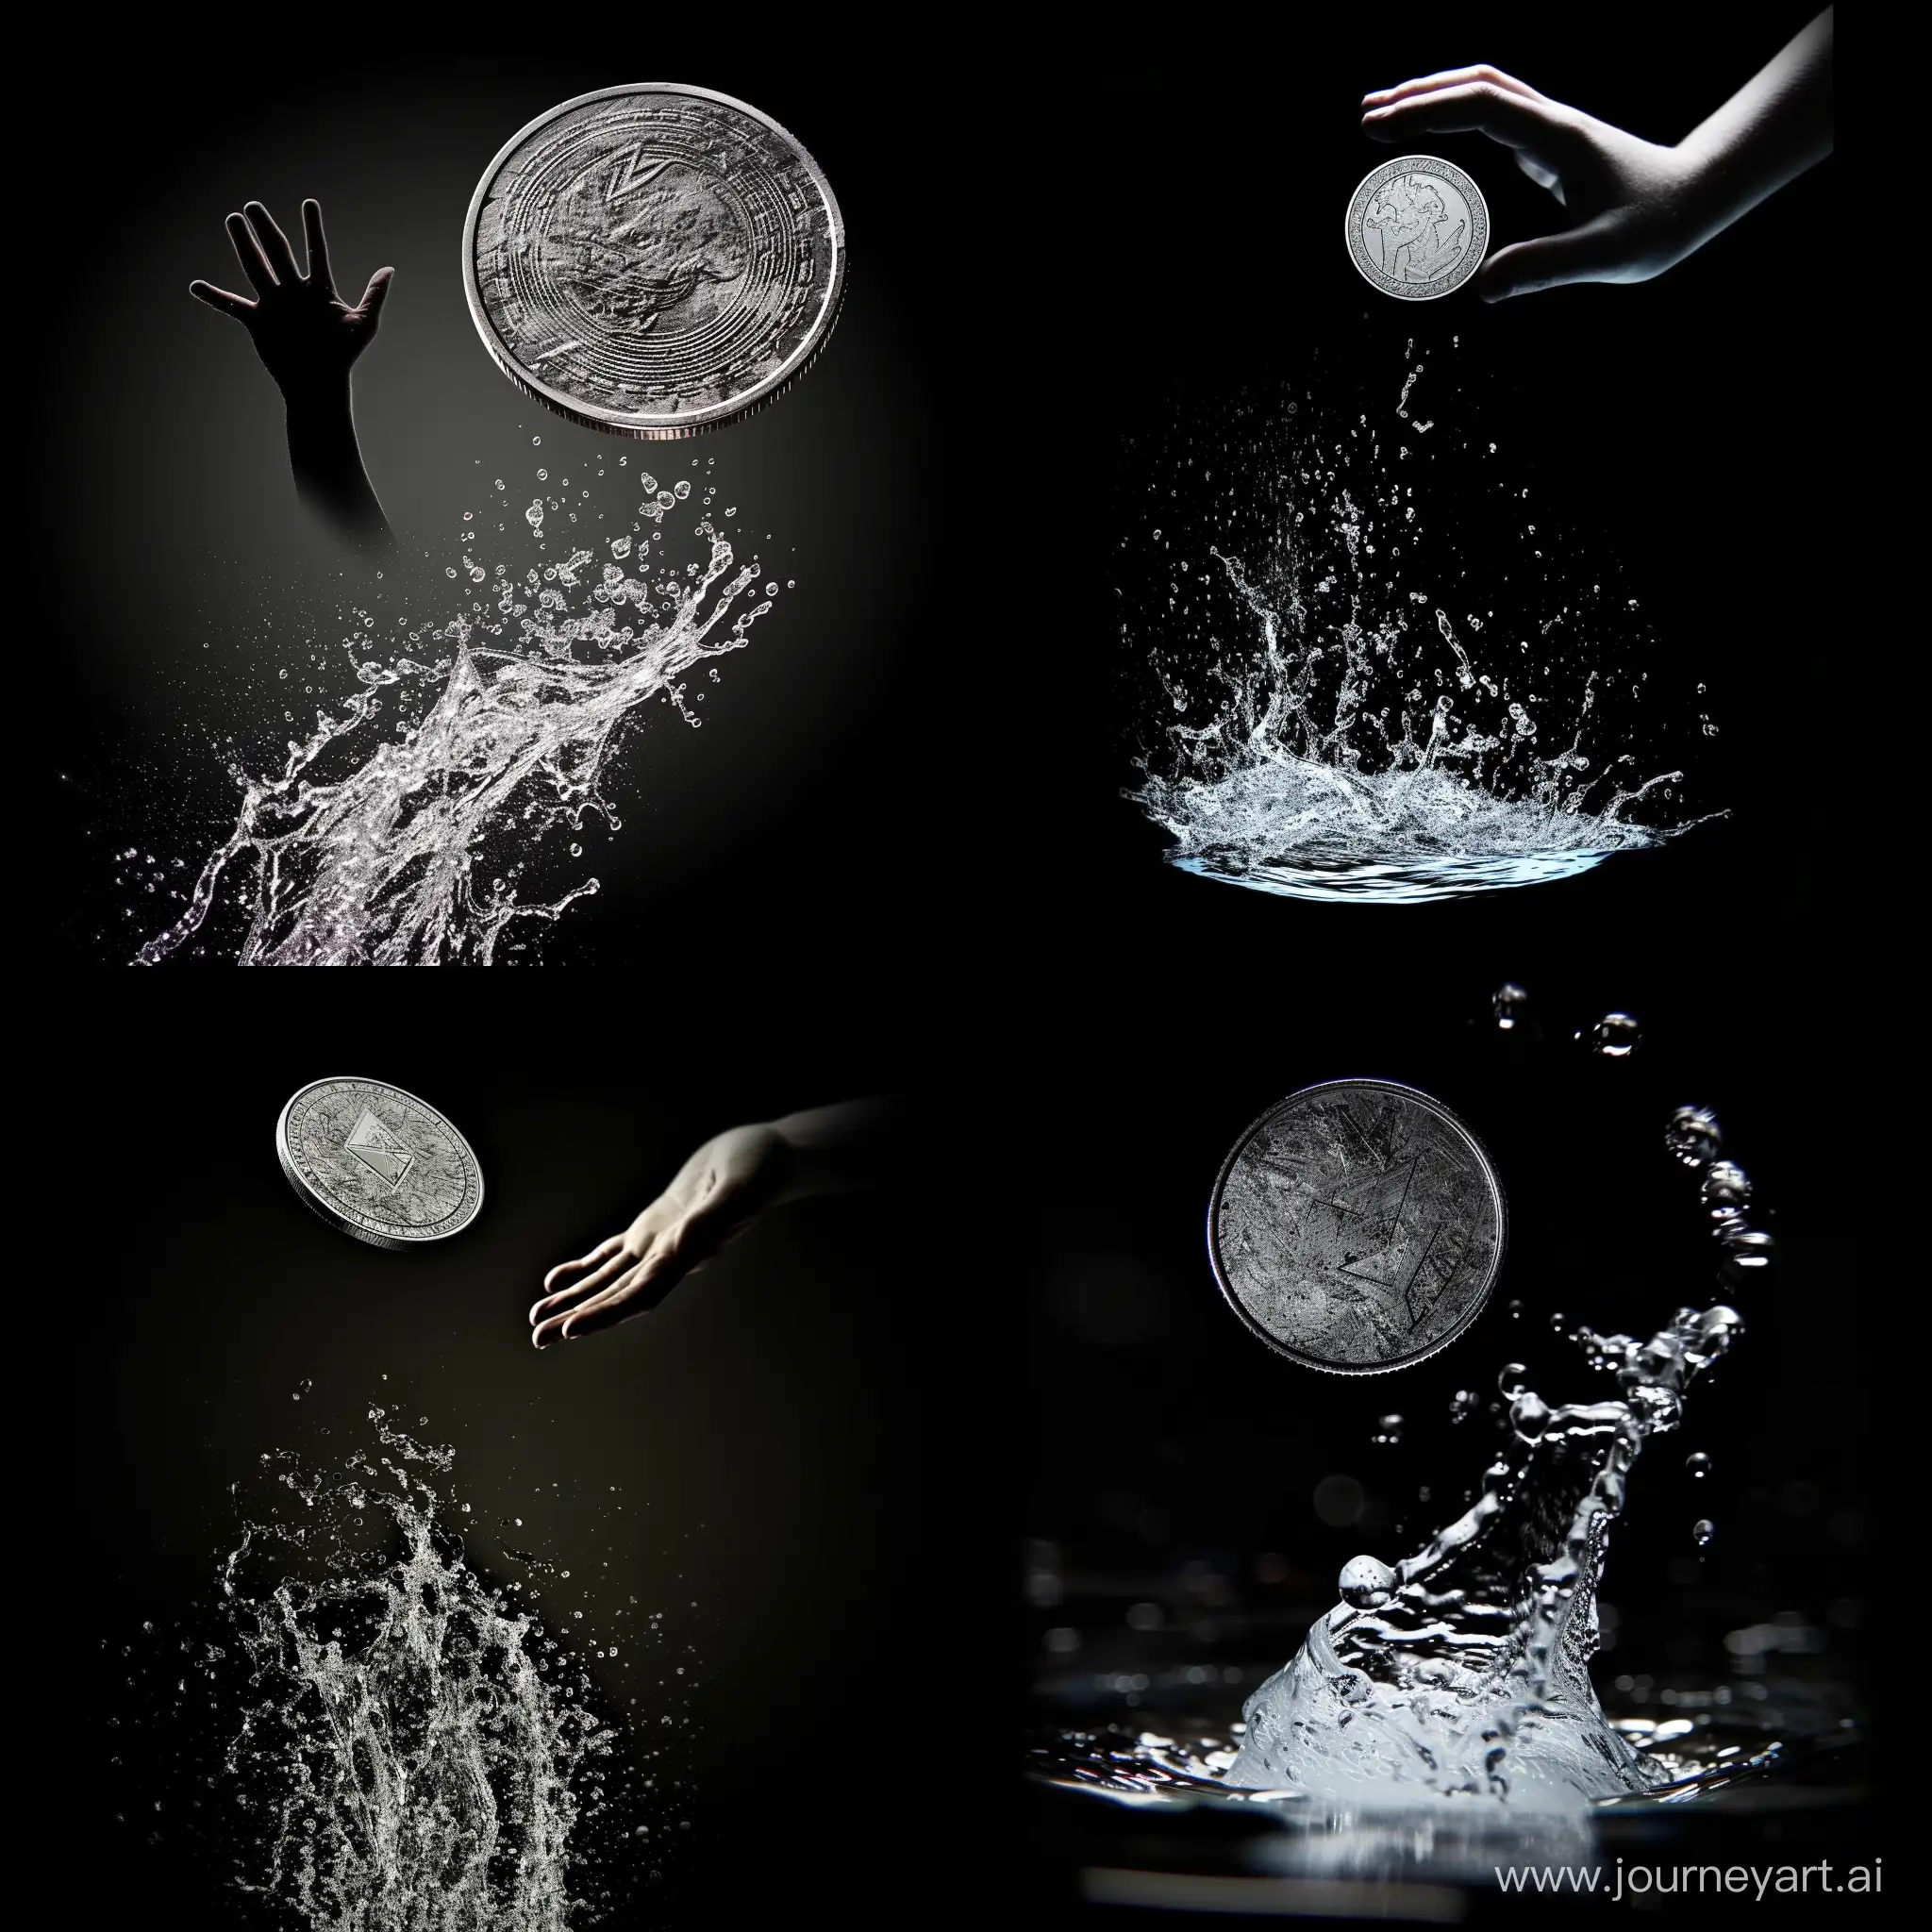 League-of-Legends-Style-Coin-Toss-with-Waterlike-Effect